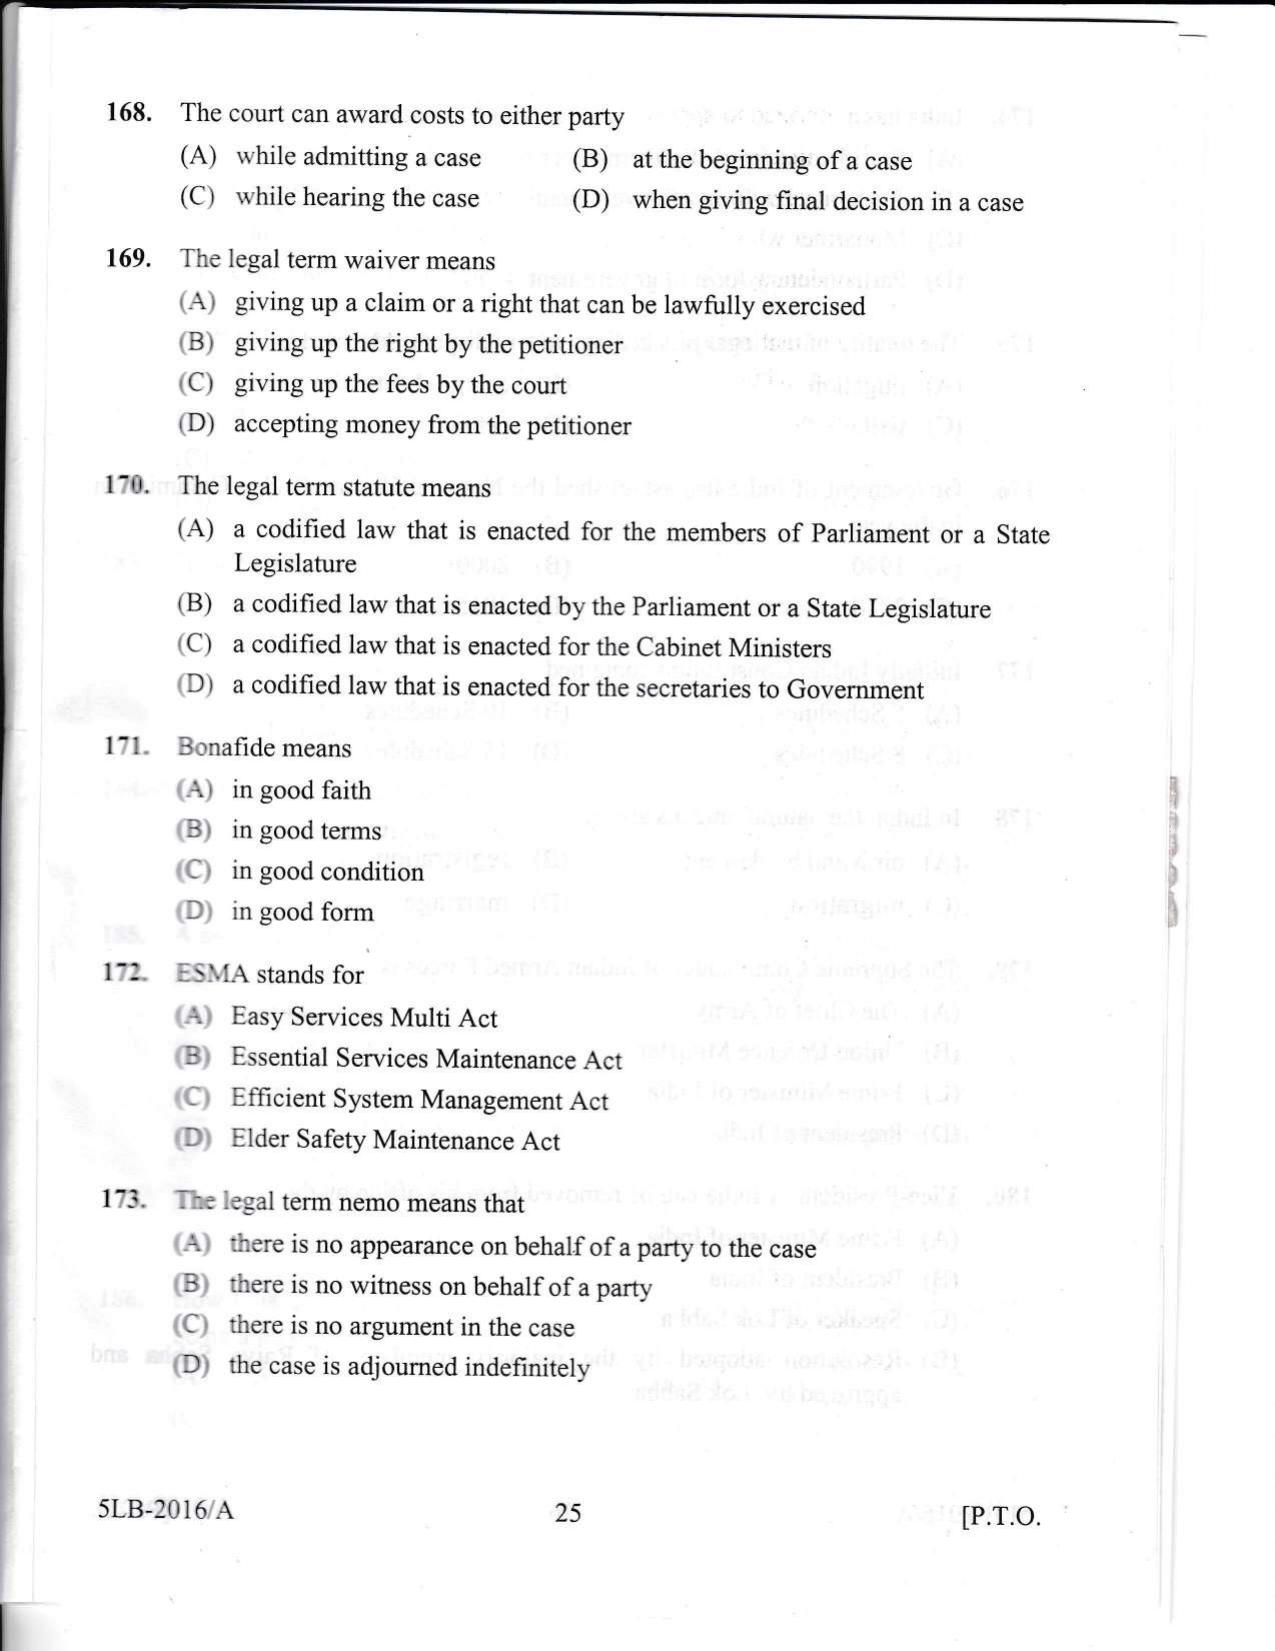 KLEE 5 Year LLB Exam 2016 Question Paper - Page 25